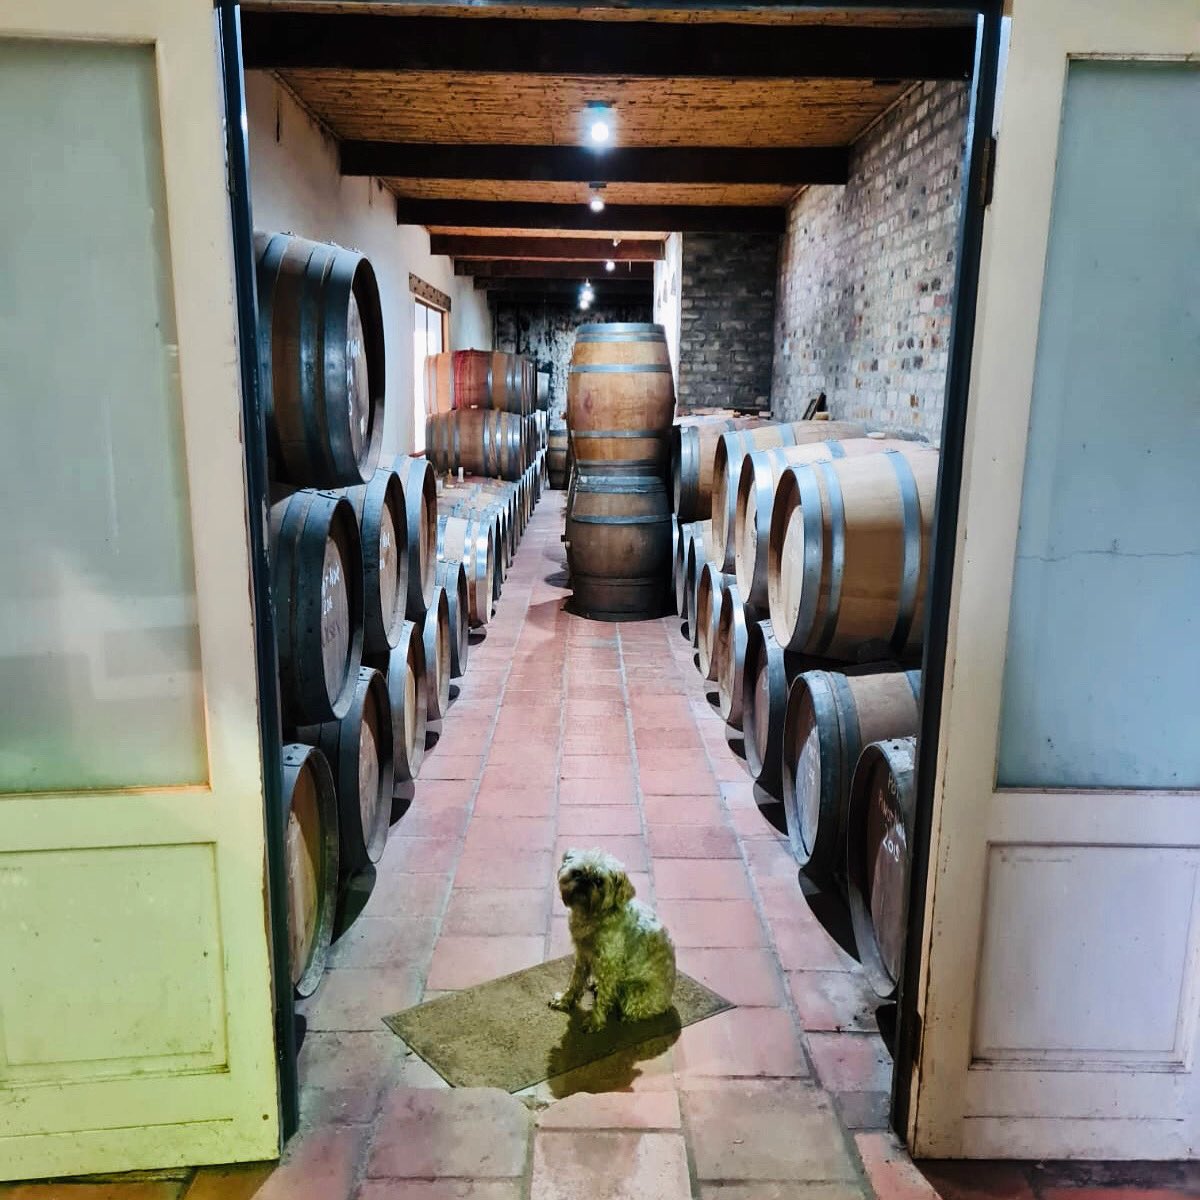 Our barrel cellar is being closely guarded by the loyal Diego. 

#diegostyle #wine #barrels #barrelcellar #experienceelgin #harvest2021 #slaintefromhighlandsroad